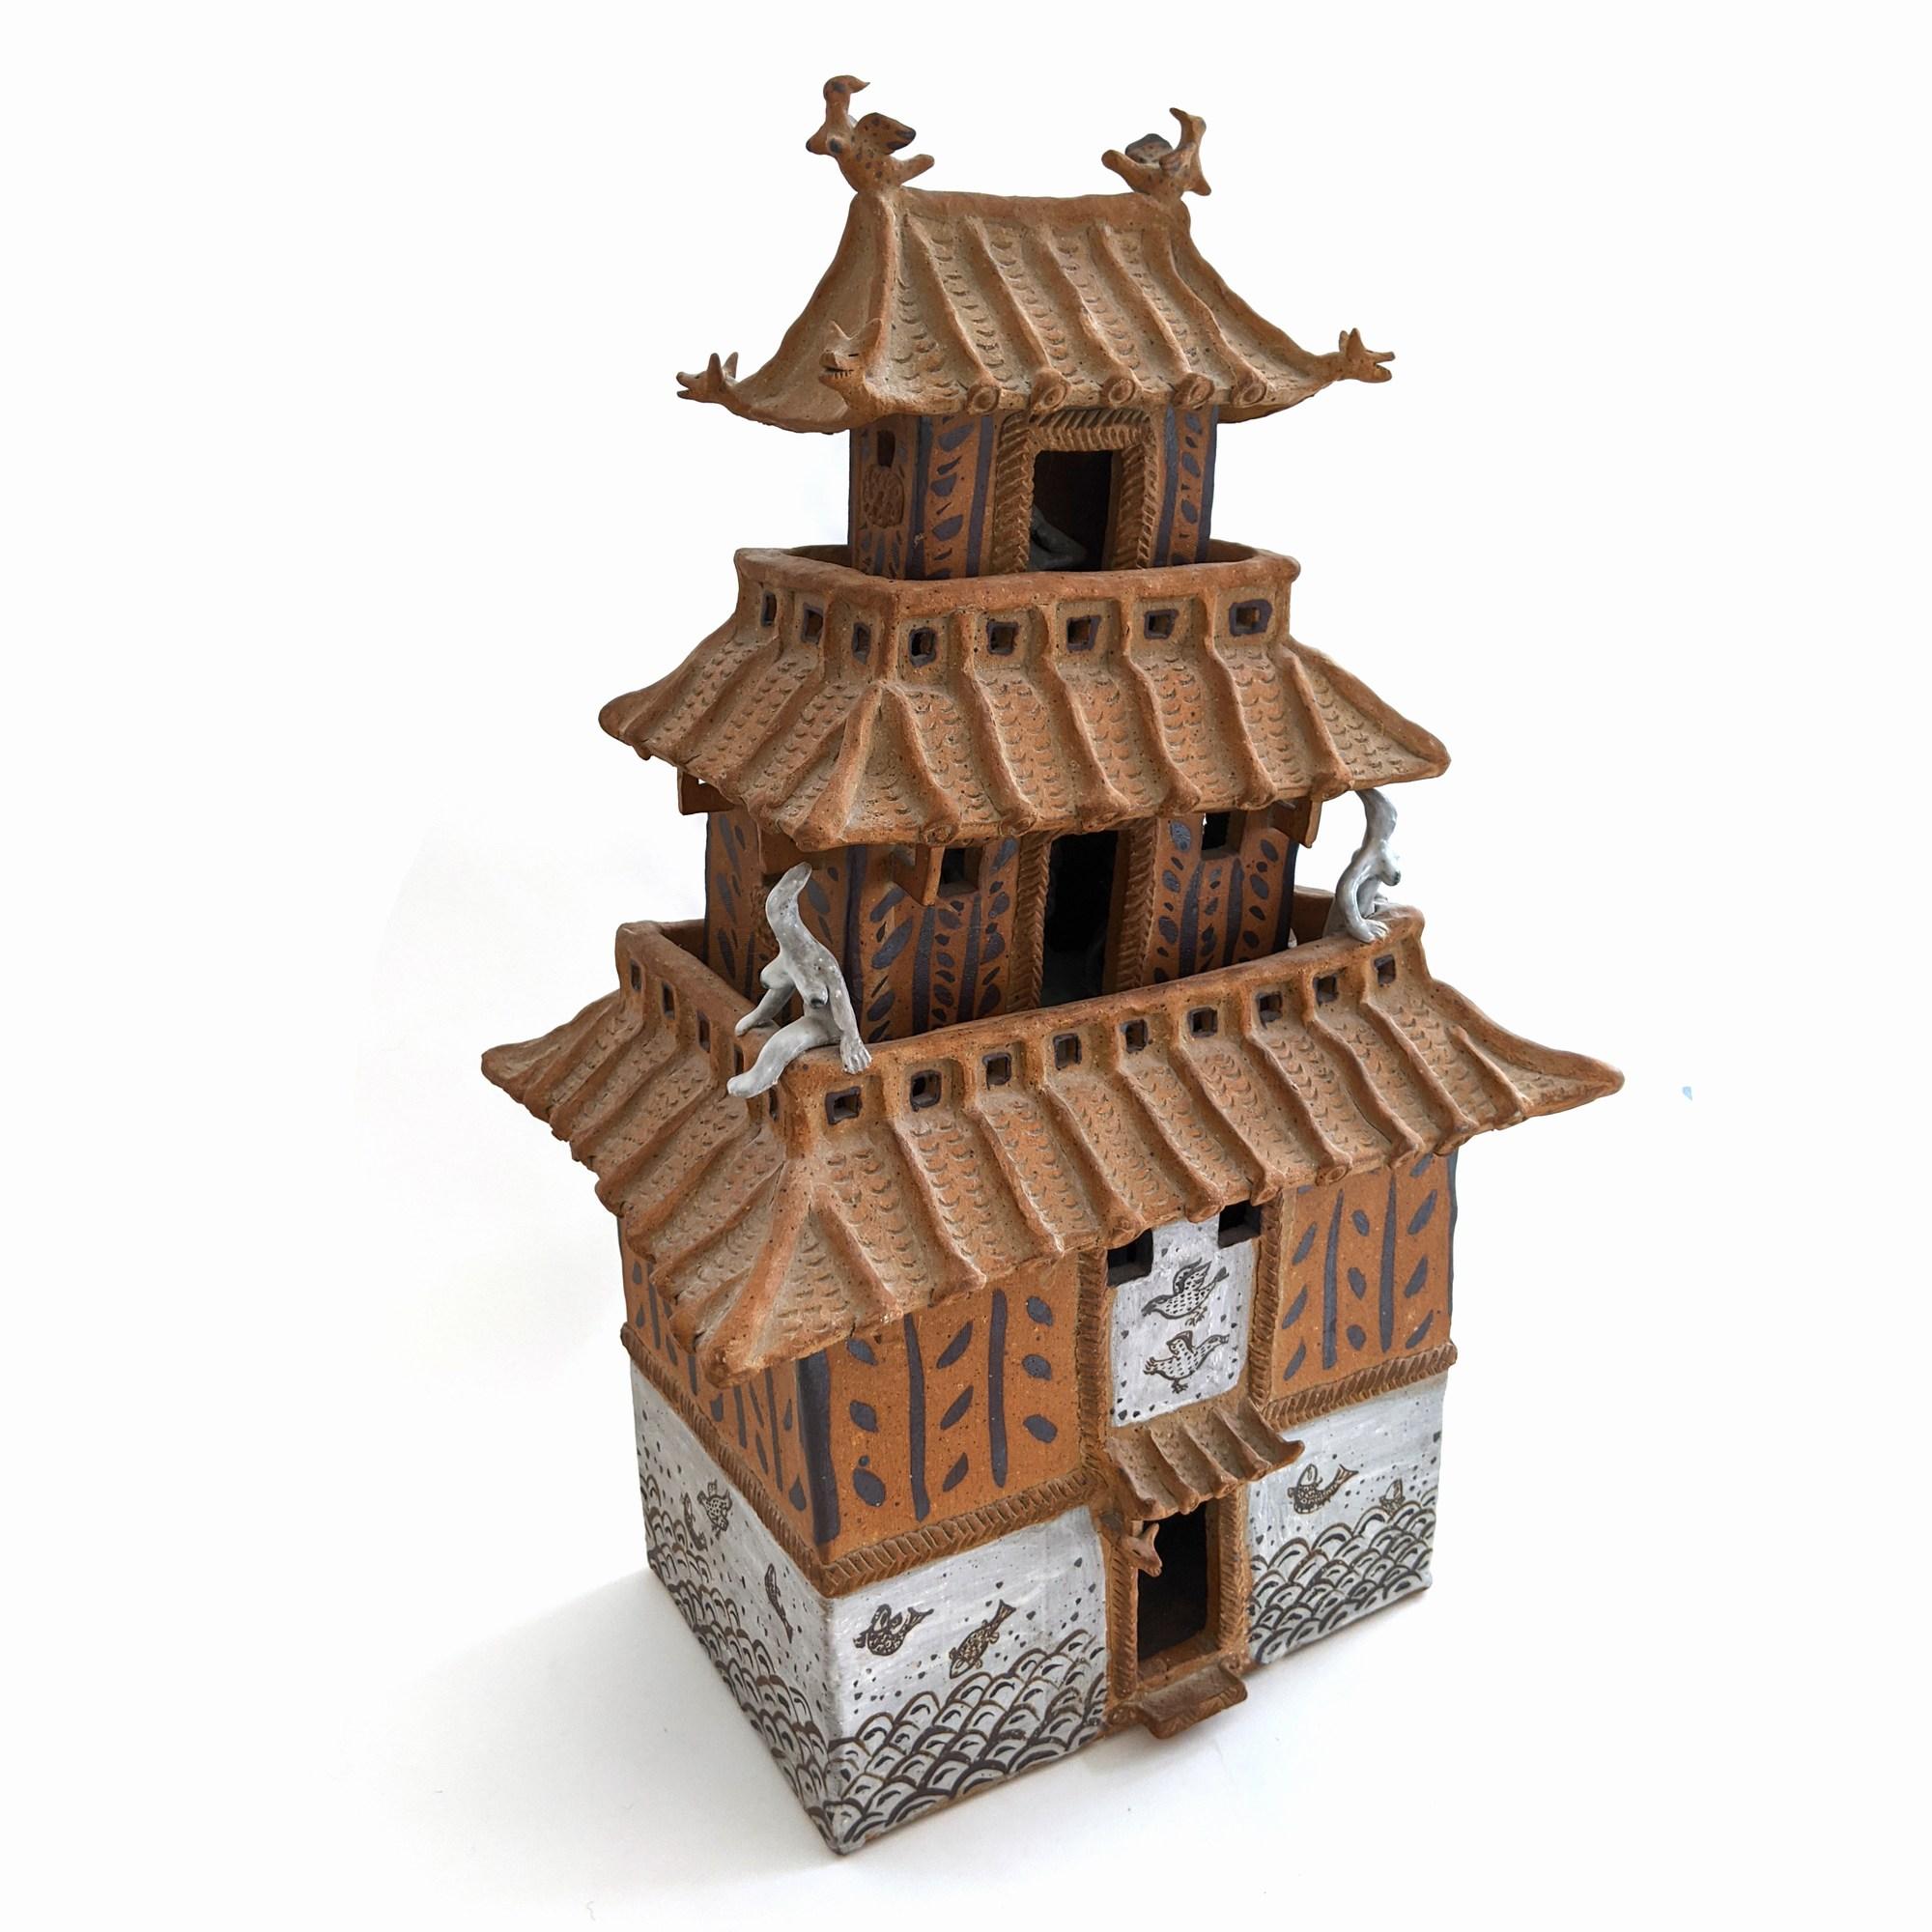 3 Tier House with Women inside - Sculpture by Akio Takamori